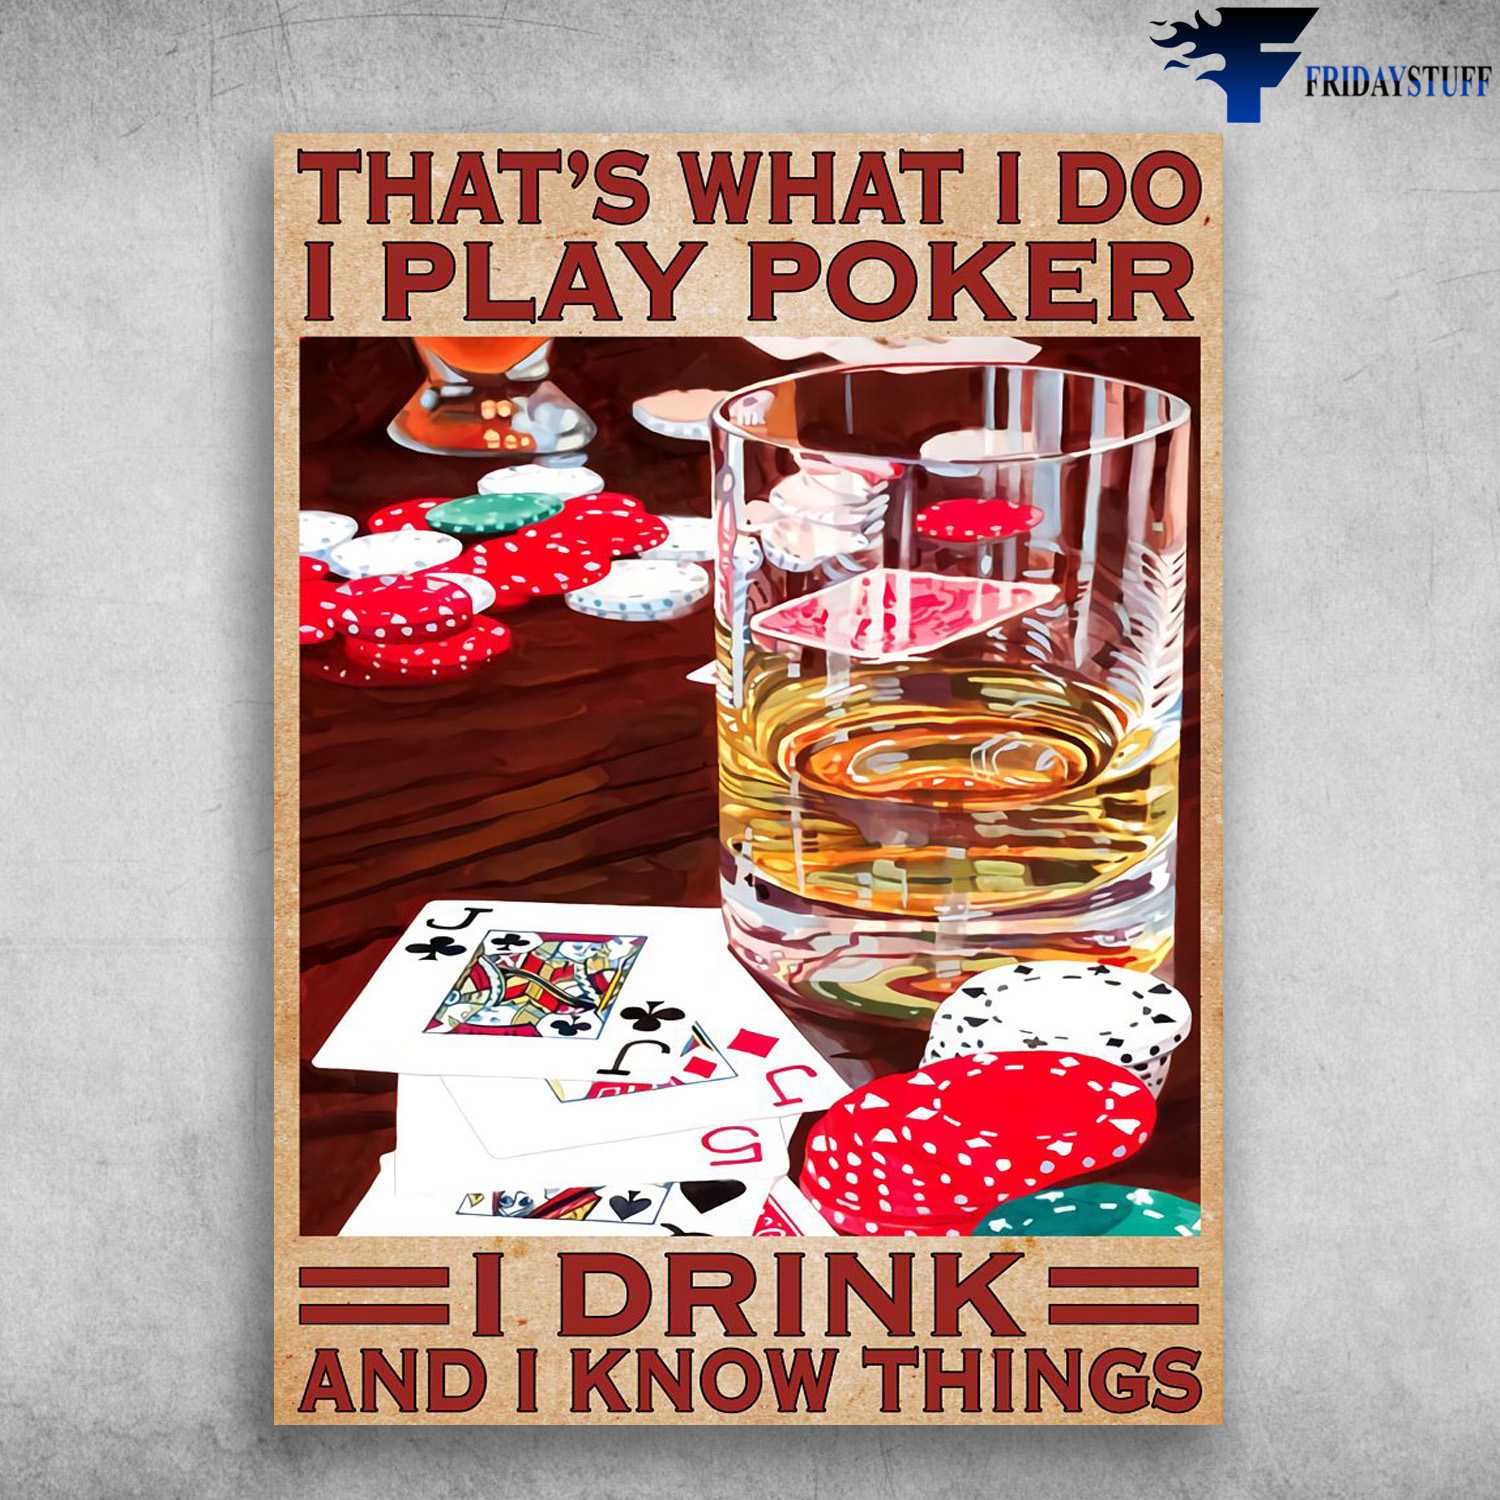 Poker And Wine, Wine Lover, That's What I Do, I Play Poker, I Drink, And I Know Things